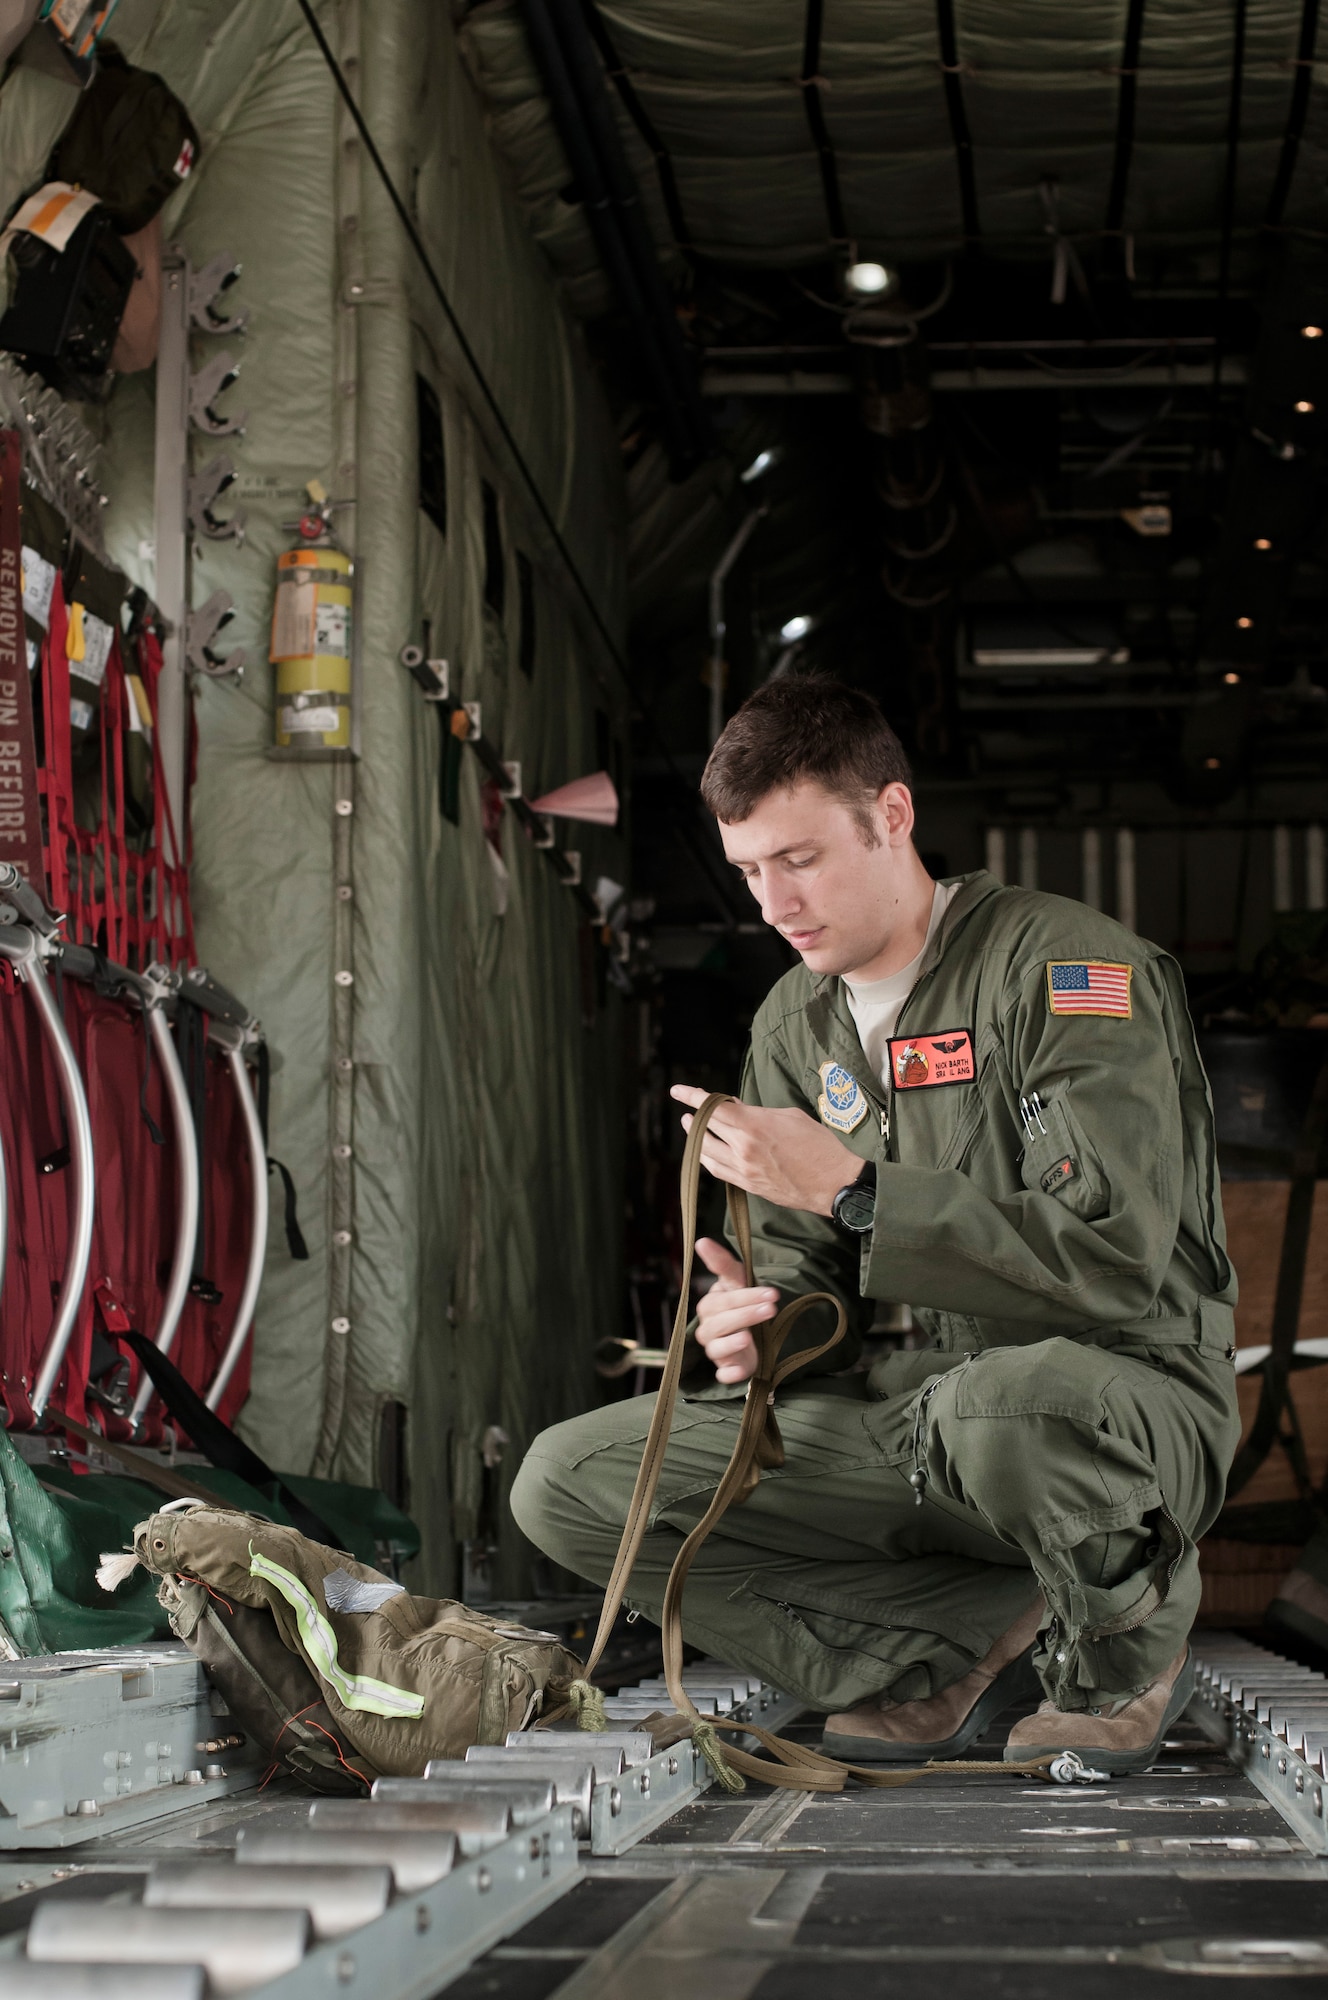 U.S. Air Force Senior Airman Nick J. Barth, an aircraft loadmaster with the 169th Airlift Squadron, packs a training bundle on a C-130 Hercules at Alpena, Mich., in support of Exercise Northern Strike 2013 on Aug. 7, 2013. Exercise Northern Strike 2013 is a joint multi-national combined arms training exercise conducted in northern Michigan. (U.S. Air National Guard photo by Master Sgt. Scott Thompson/released)